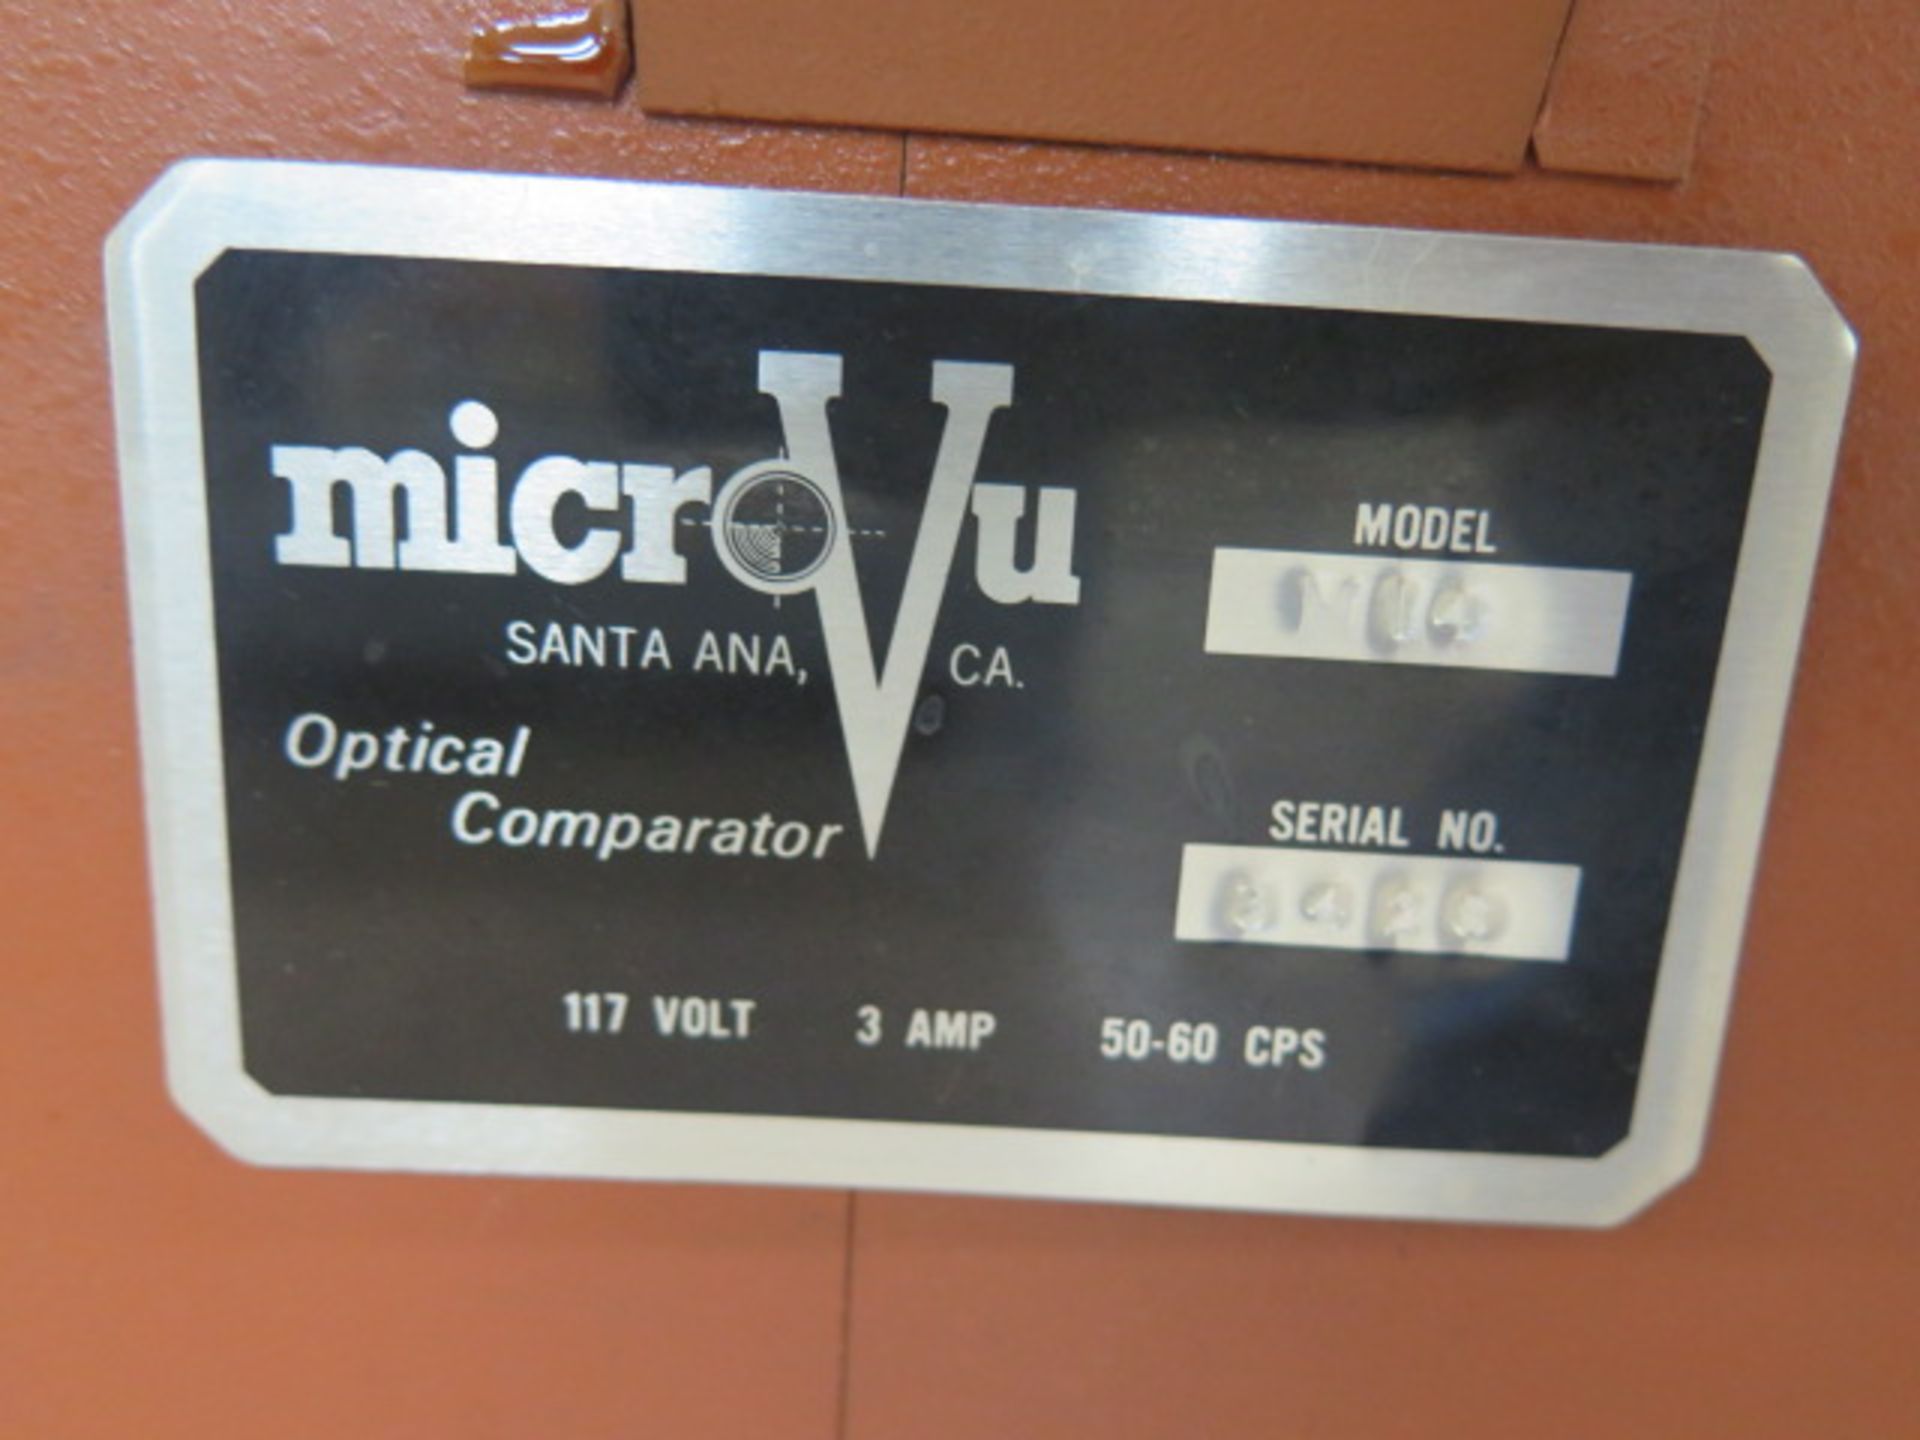 MicroVu mdl. M14 14” Floor Model Optical Comparator s/n 3428 w/ Acu-Rite Master-G DRO, Surface and - Image 8 of 8